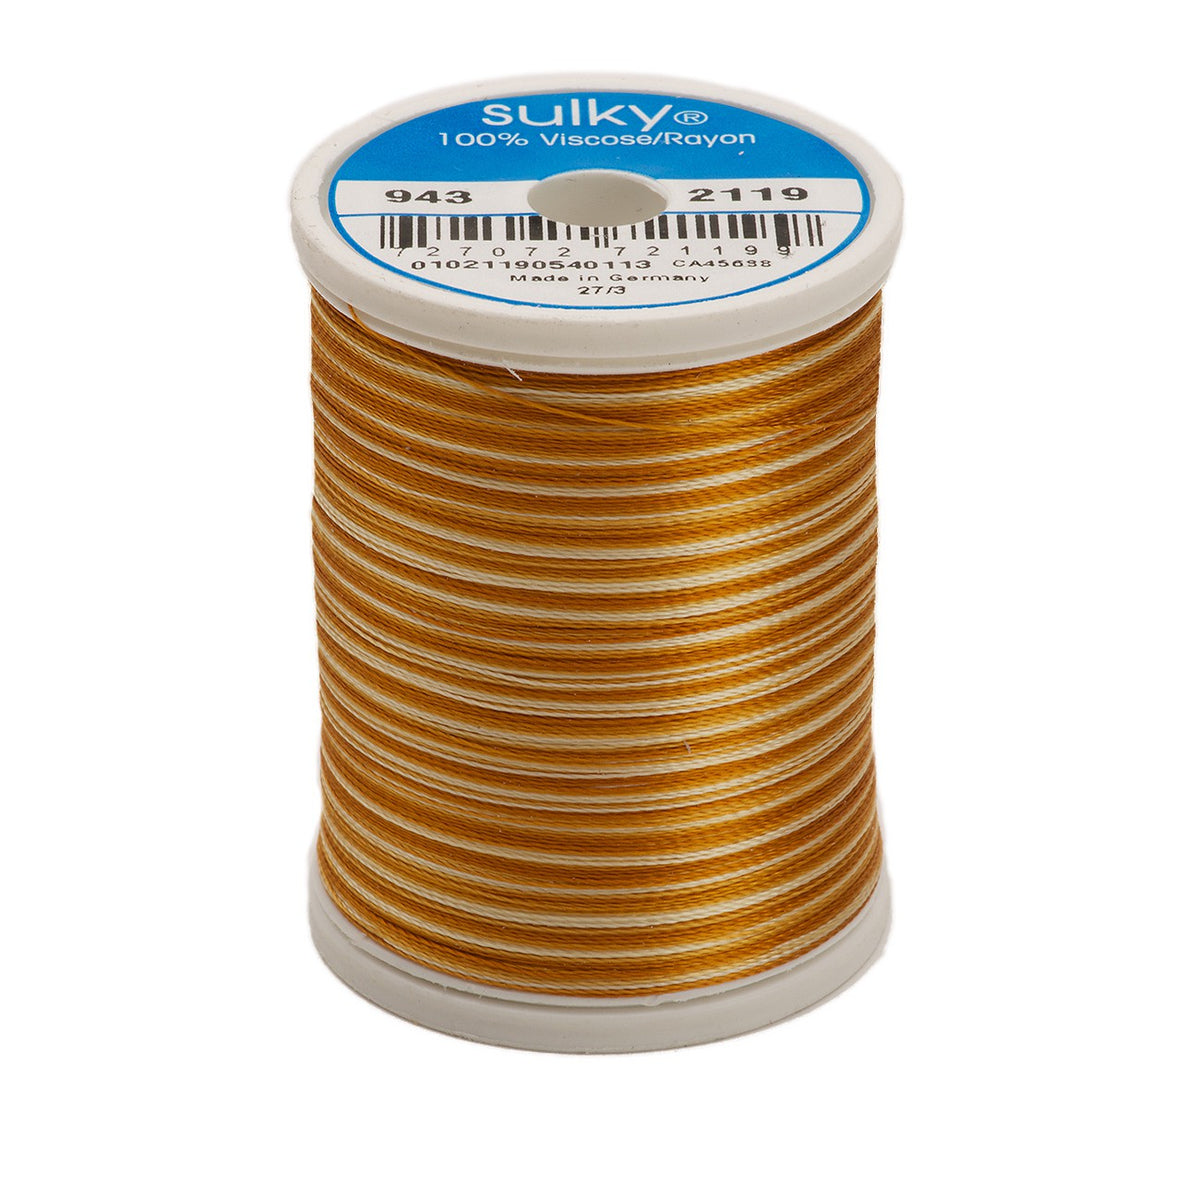 Sulky Variegated 40wt Rayon Thread 2119 Light Brown   850yd